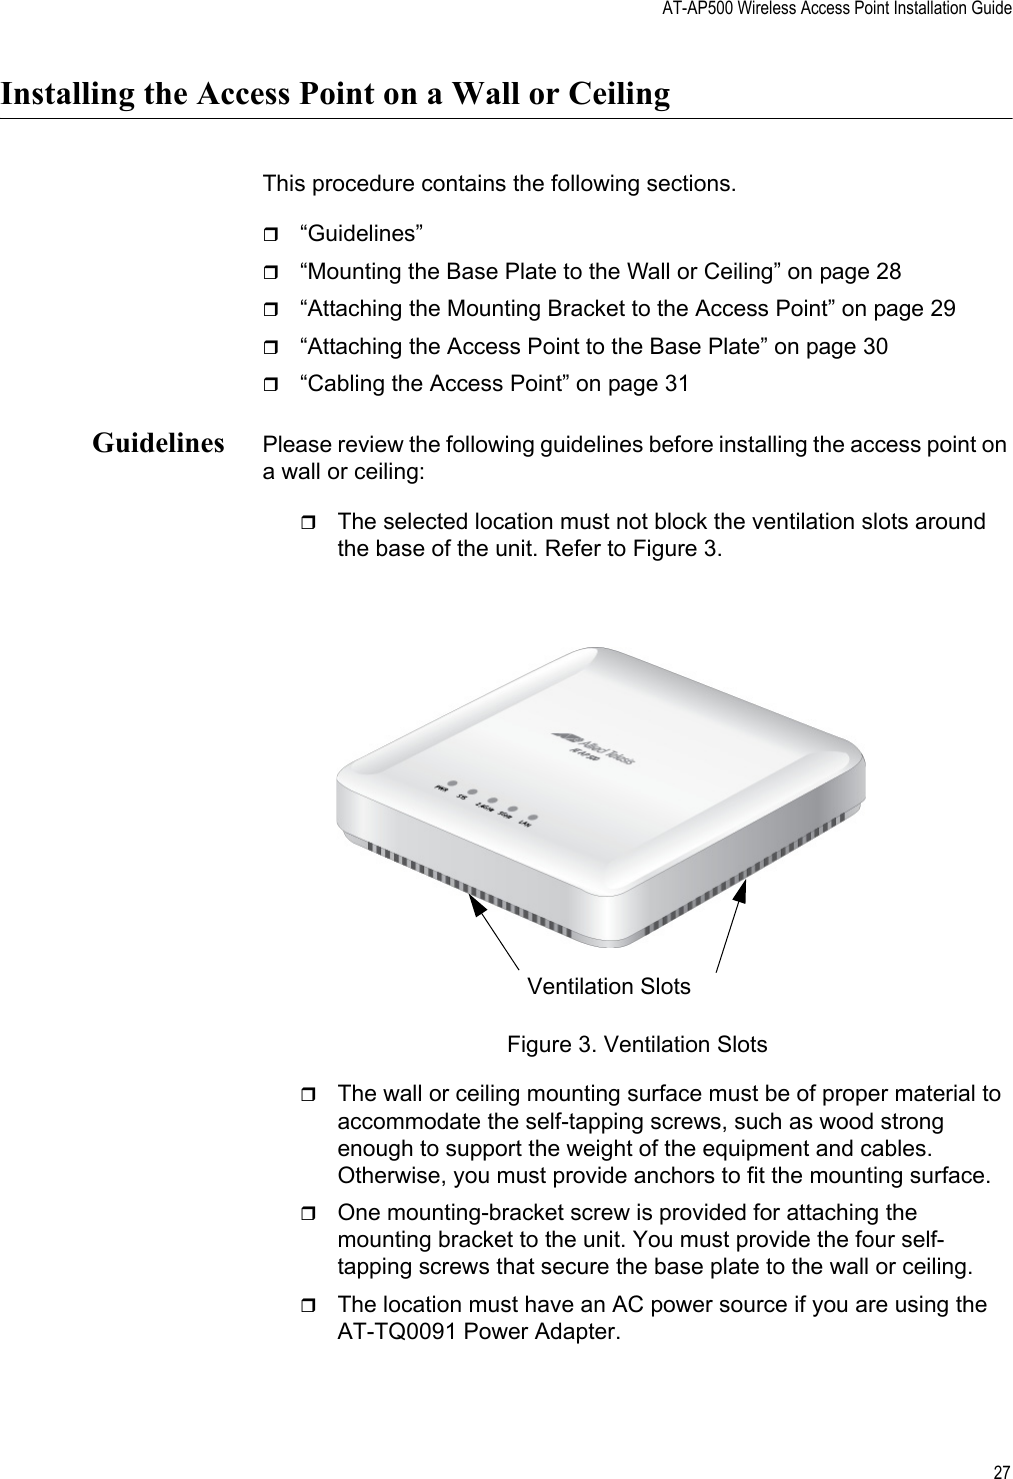 AT-AP500 Wireless Access Point Installation Guide27Installing the Access Point on a Wall or CeilingThis procedure contains the following sections.“Guidelines”“Mounting the Base Plate to the Wall or Ceiling” on page 28“Attaching the Mounting Bracket to the Access Point” on page 29“Attaching the Access Point to the Base Plate” on page 30“Cabling the Access Point” on page 31Guidelines Please review the following guidelines before installing the access point on a wall or ceiling:The selected location must not block the ventilation slots around the base of the unit. Refer to Figure 3.Figure 3. Ventilation SlotsThe wall or ceiling mounting surface must be of proper material to accommodate the self-tapping screws, such as wood strong enough to support the weight of the equipment and cables. Otherwise, you must provide anchors to fit the mounting surface.One mounting-bracket screw is provided for attaching the mounting bracket to the unit. You must provide the four self-tapping screws that secure the base plate to the wall or ceiling.The location must have an AC power source if you are using the AT-TQ0091 Power Adapter.Ventilation Slots Review Draft 2-1-16